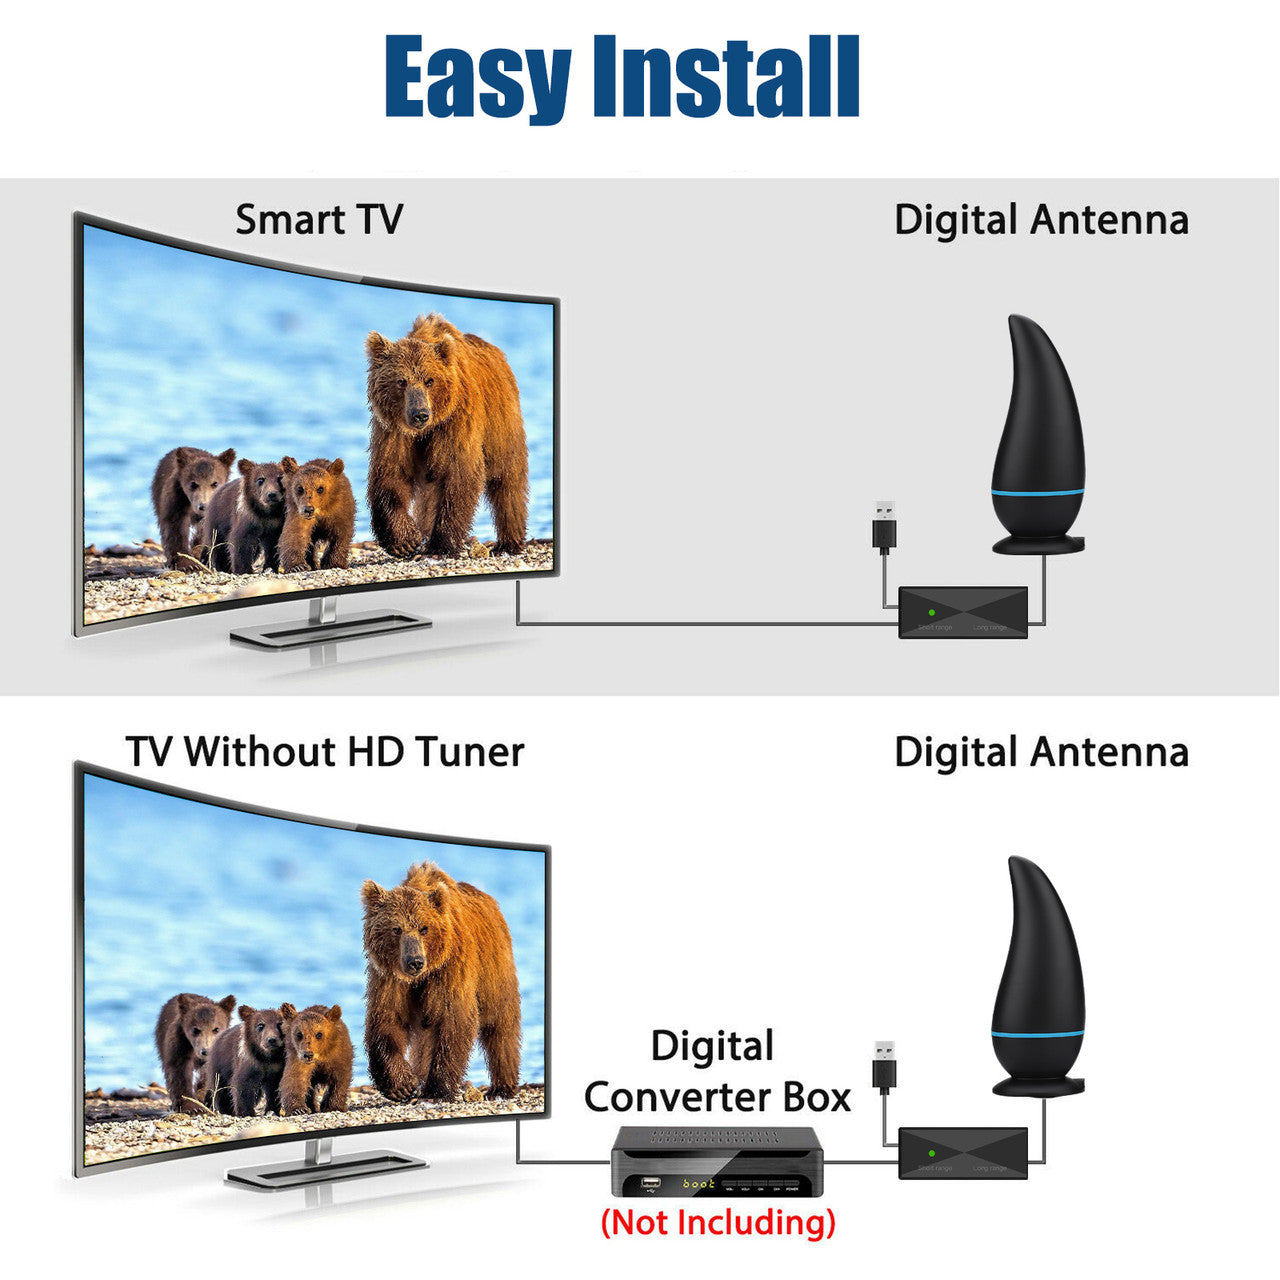 New Indoor HDTV Antenna with a Unique Design and Strong Signal Reception, Easy to Install